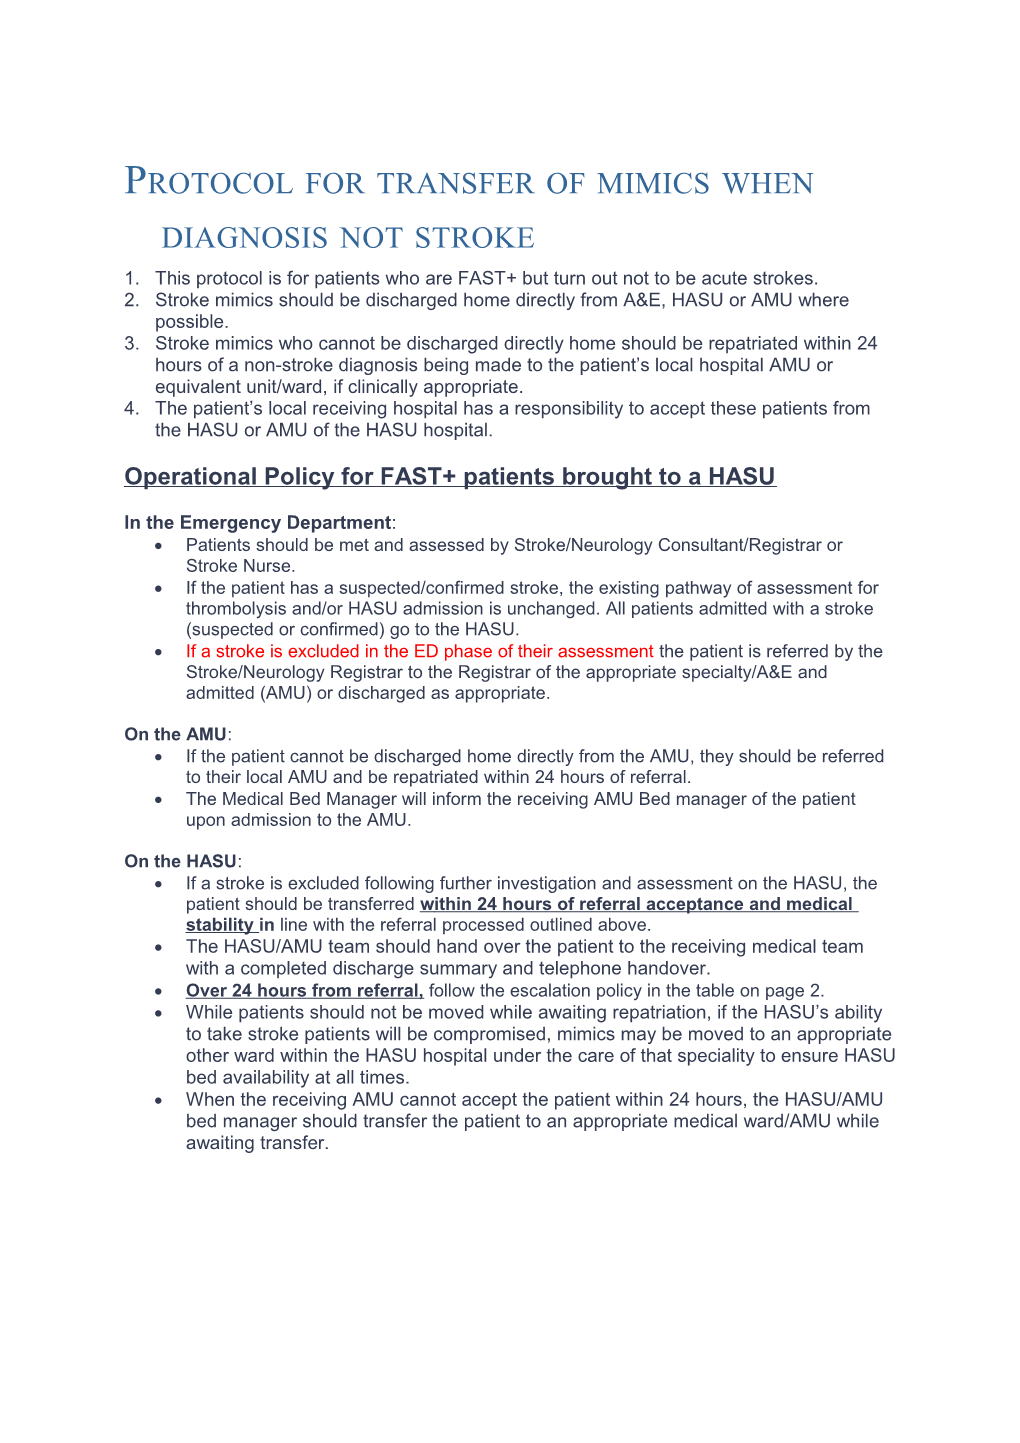 Protocol for Transfer of Mimics When Diagnosis Not Stroke